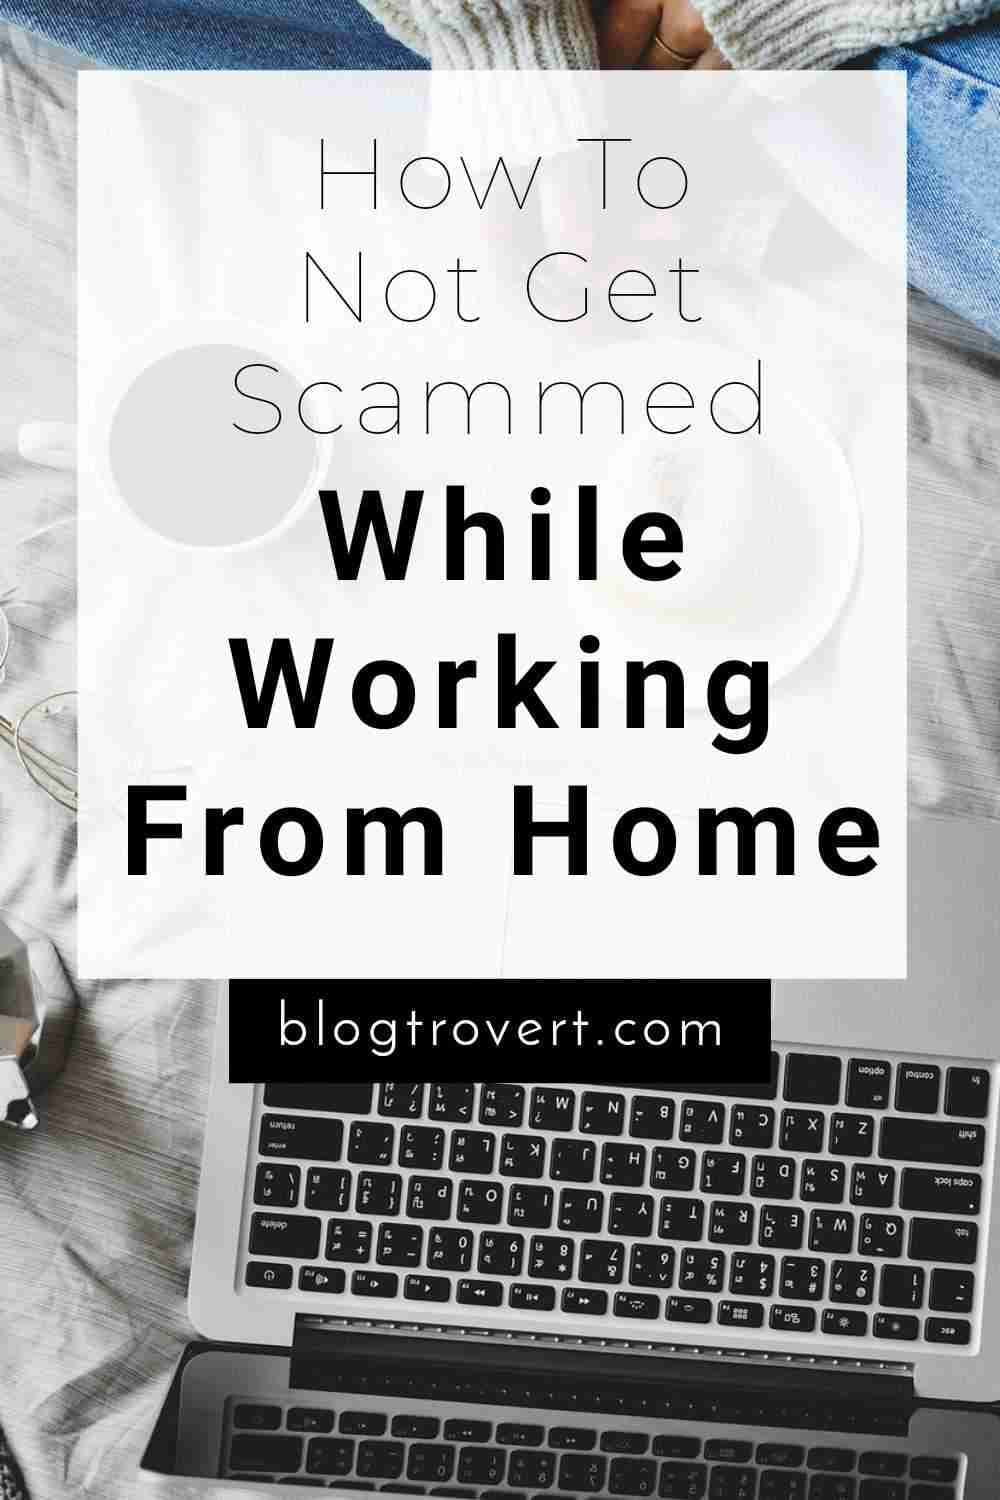 Work from home job scams